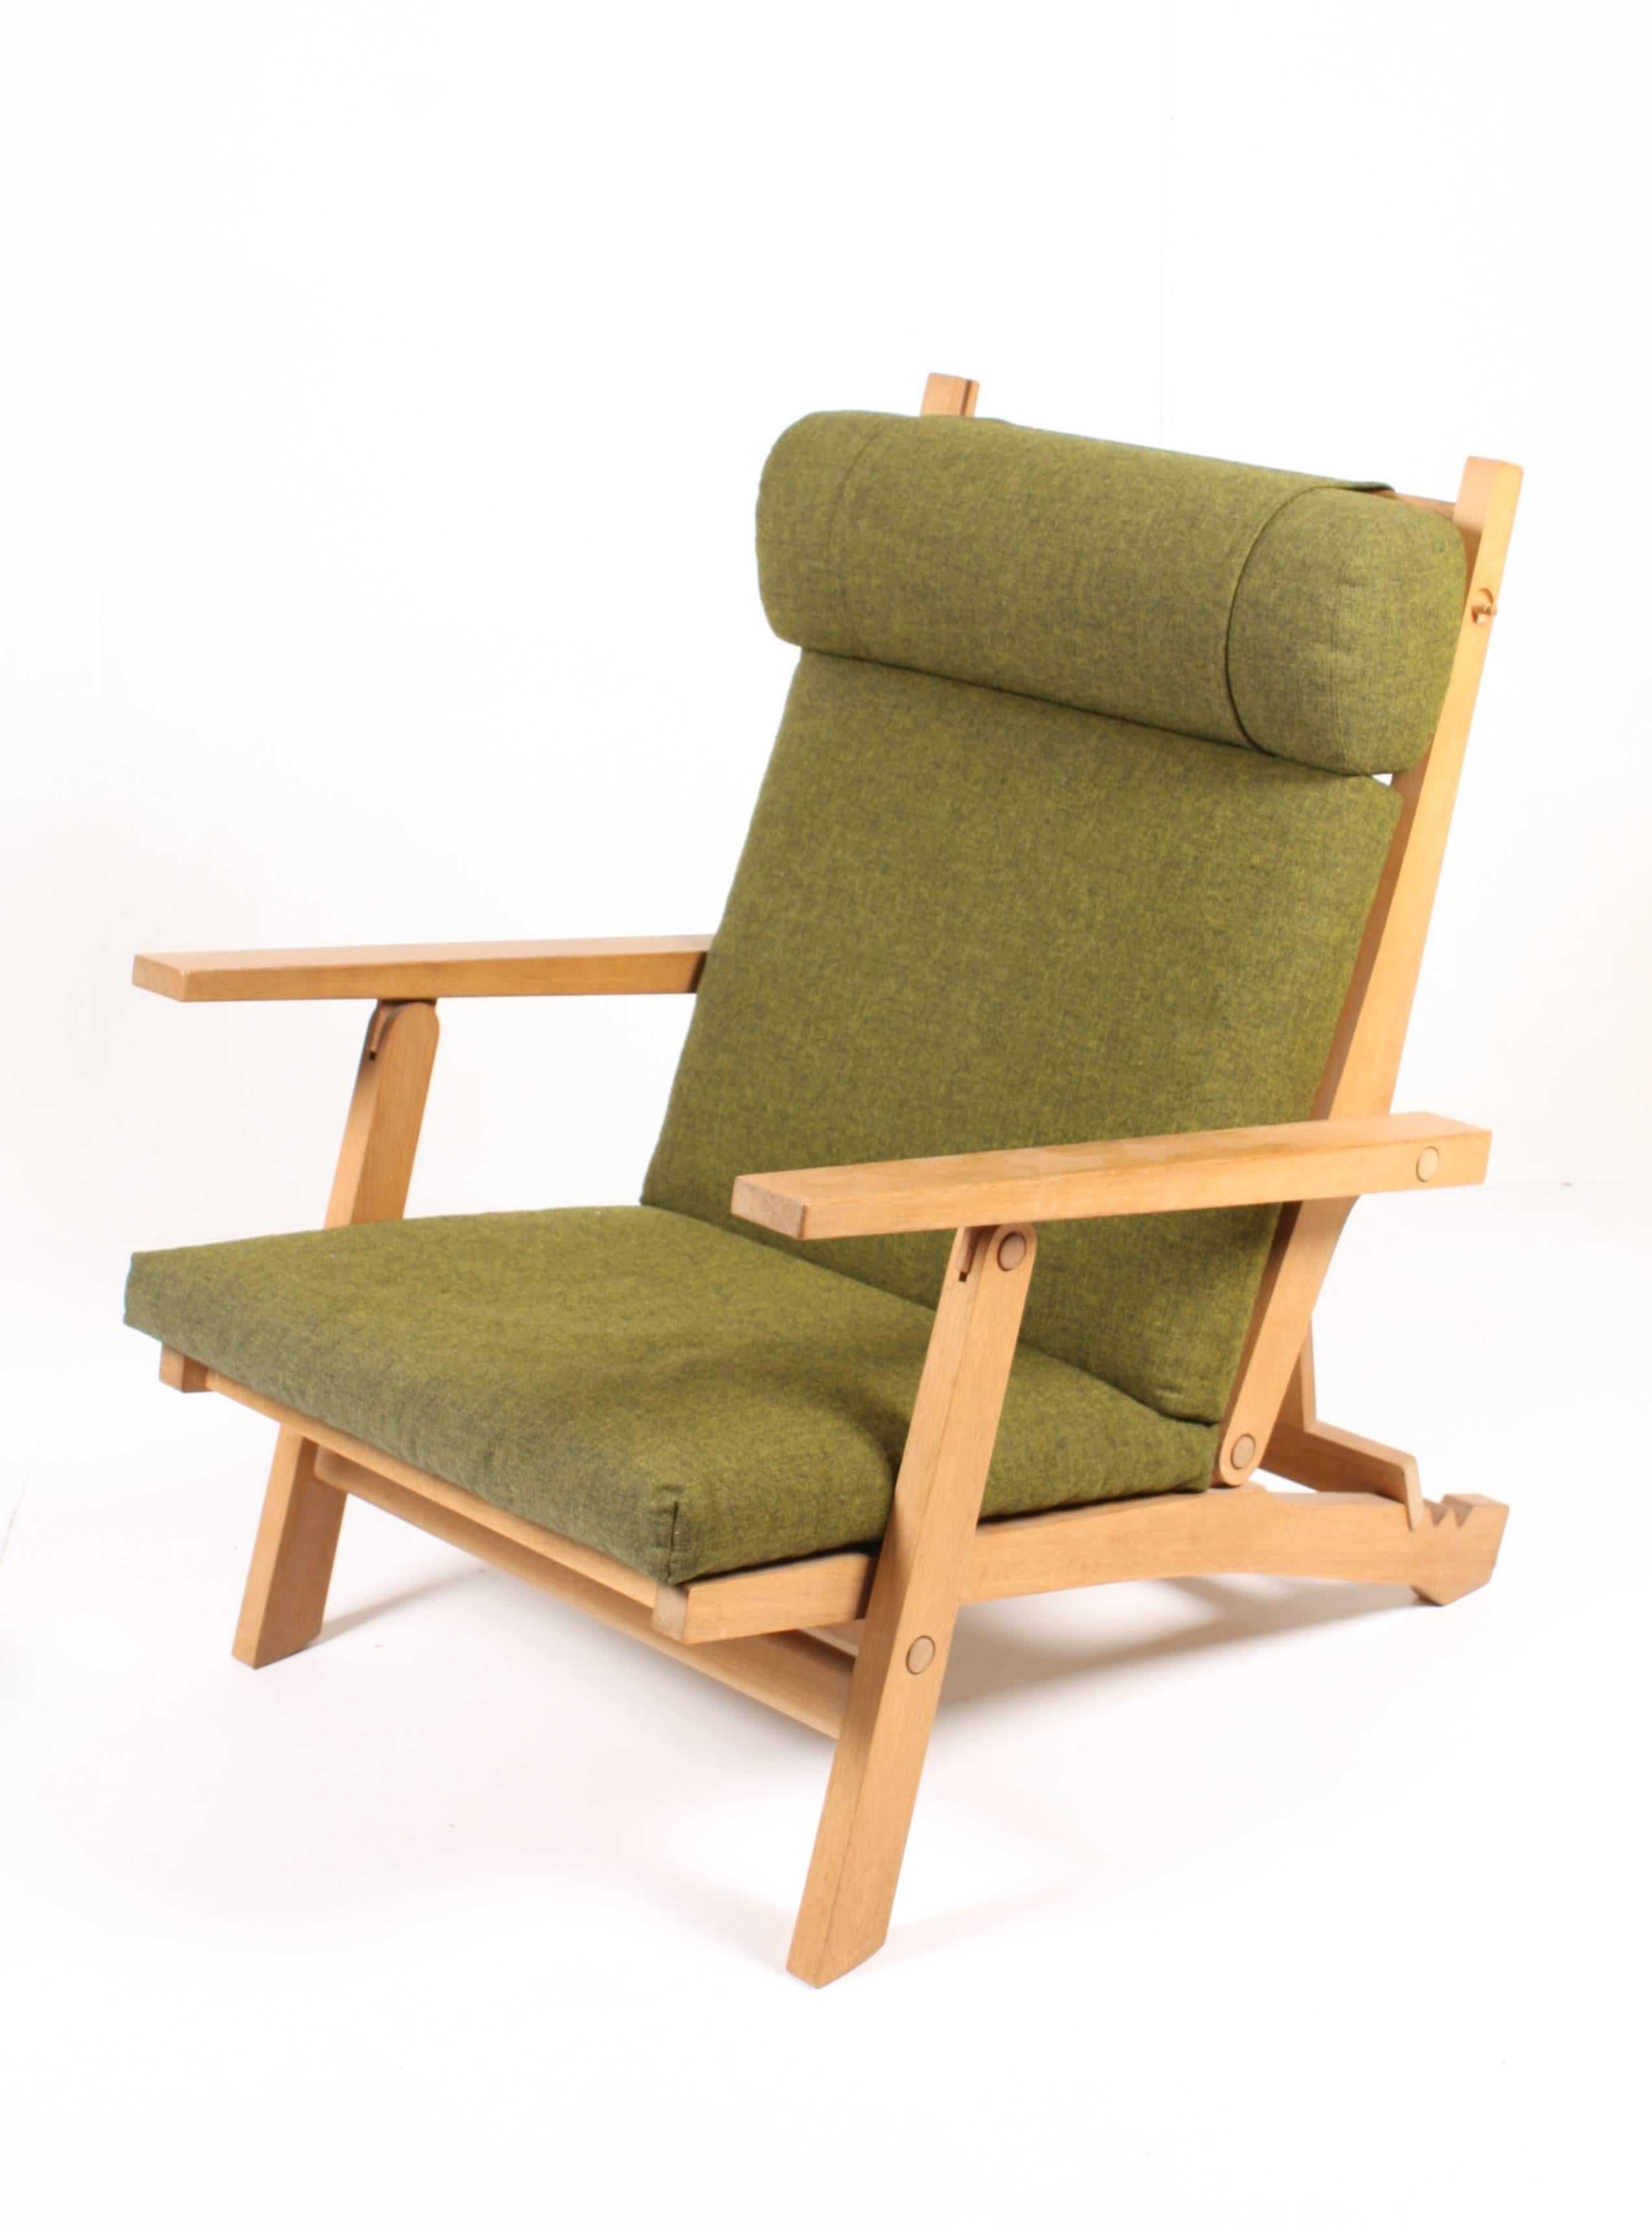 Pair of AP71 folding lounge chairs in solid oak with green wool upholstery. Designed by Hans J Wegner for AP stolen Valby in the 1968. Great original condition. A rare folding oak frame lounge chair with an adjustable back and headrest. The design